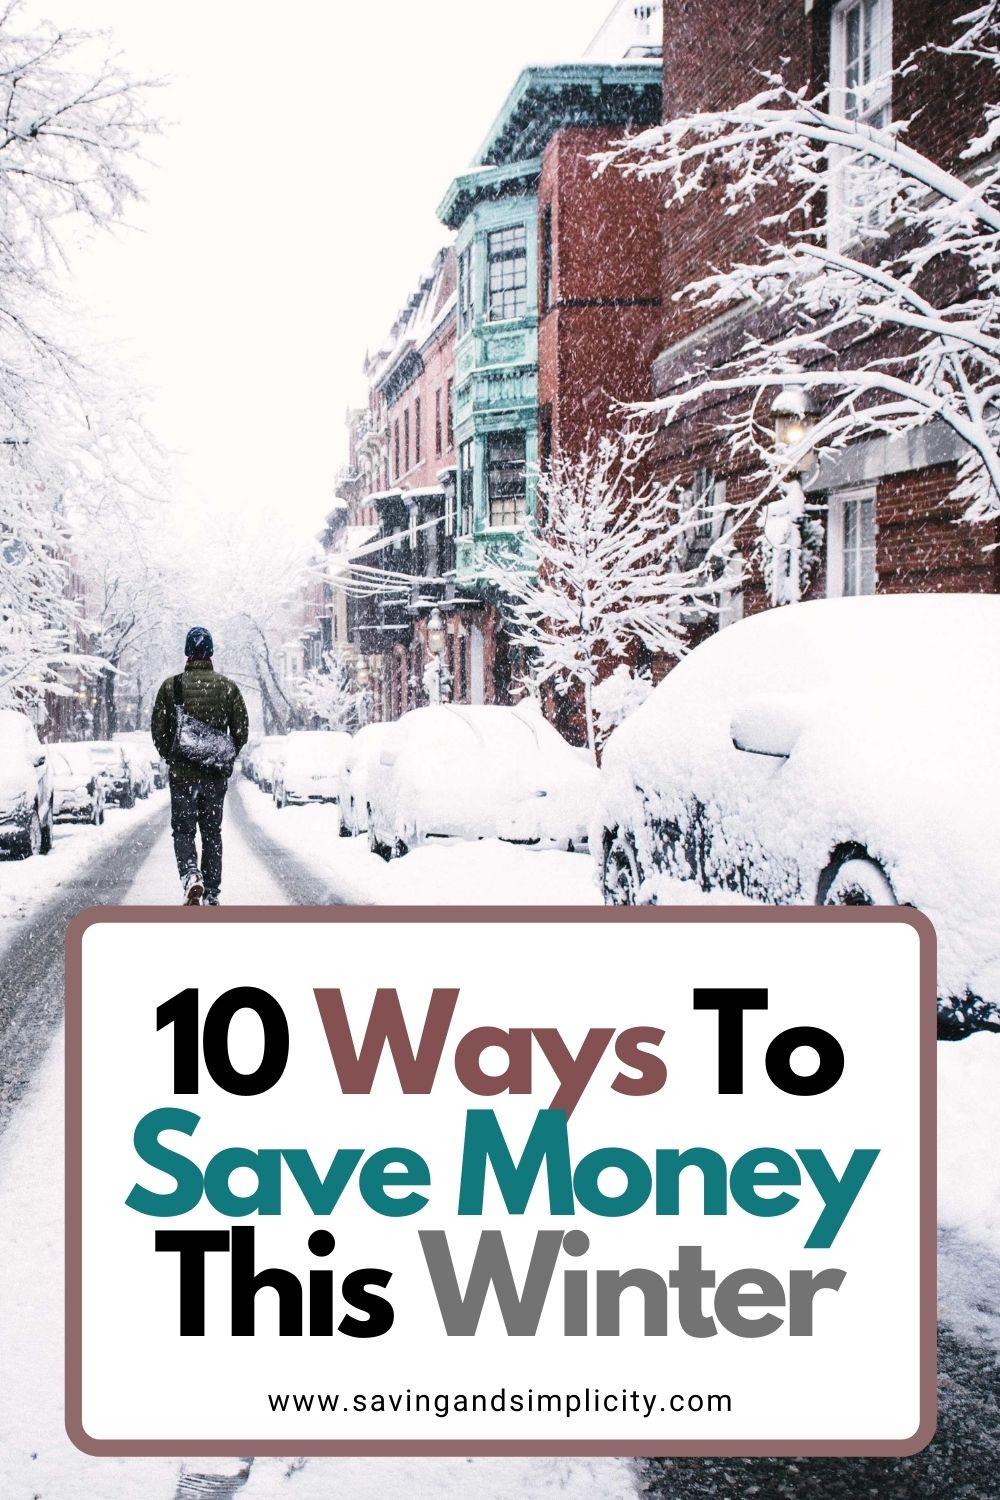 Seven easy ways to save money this winter 